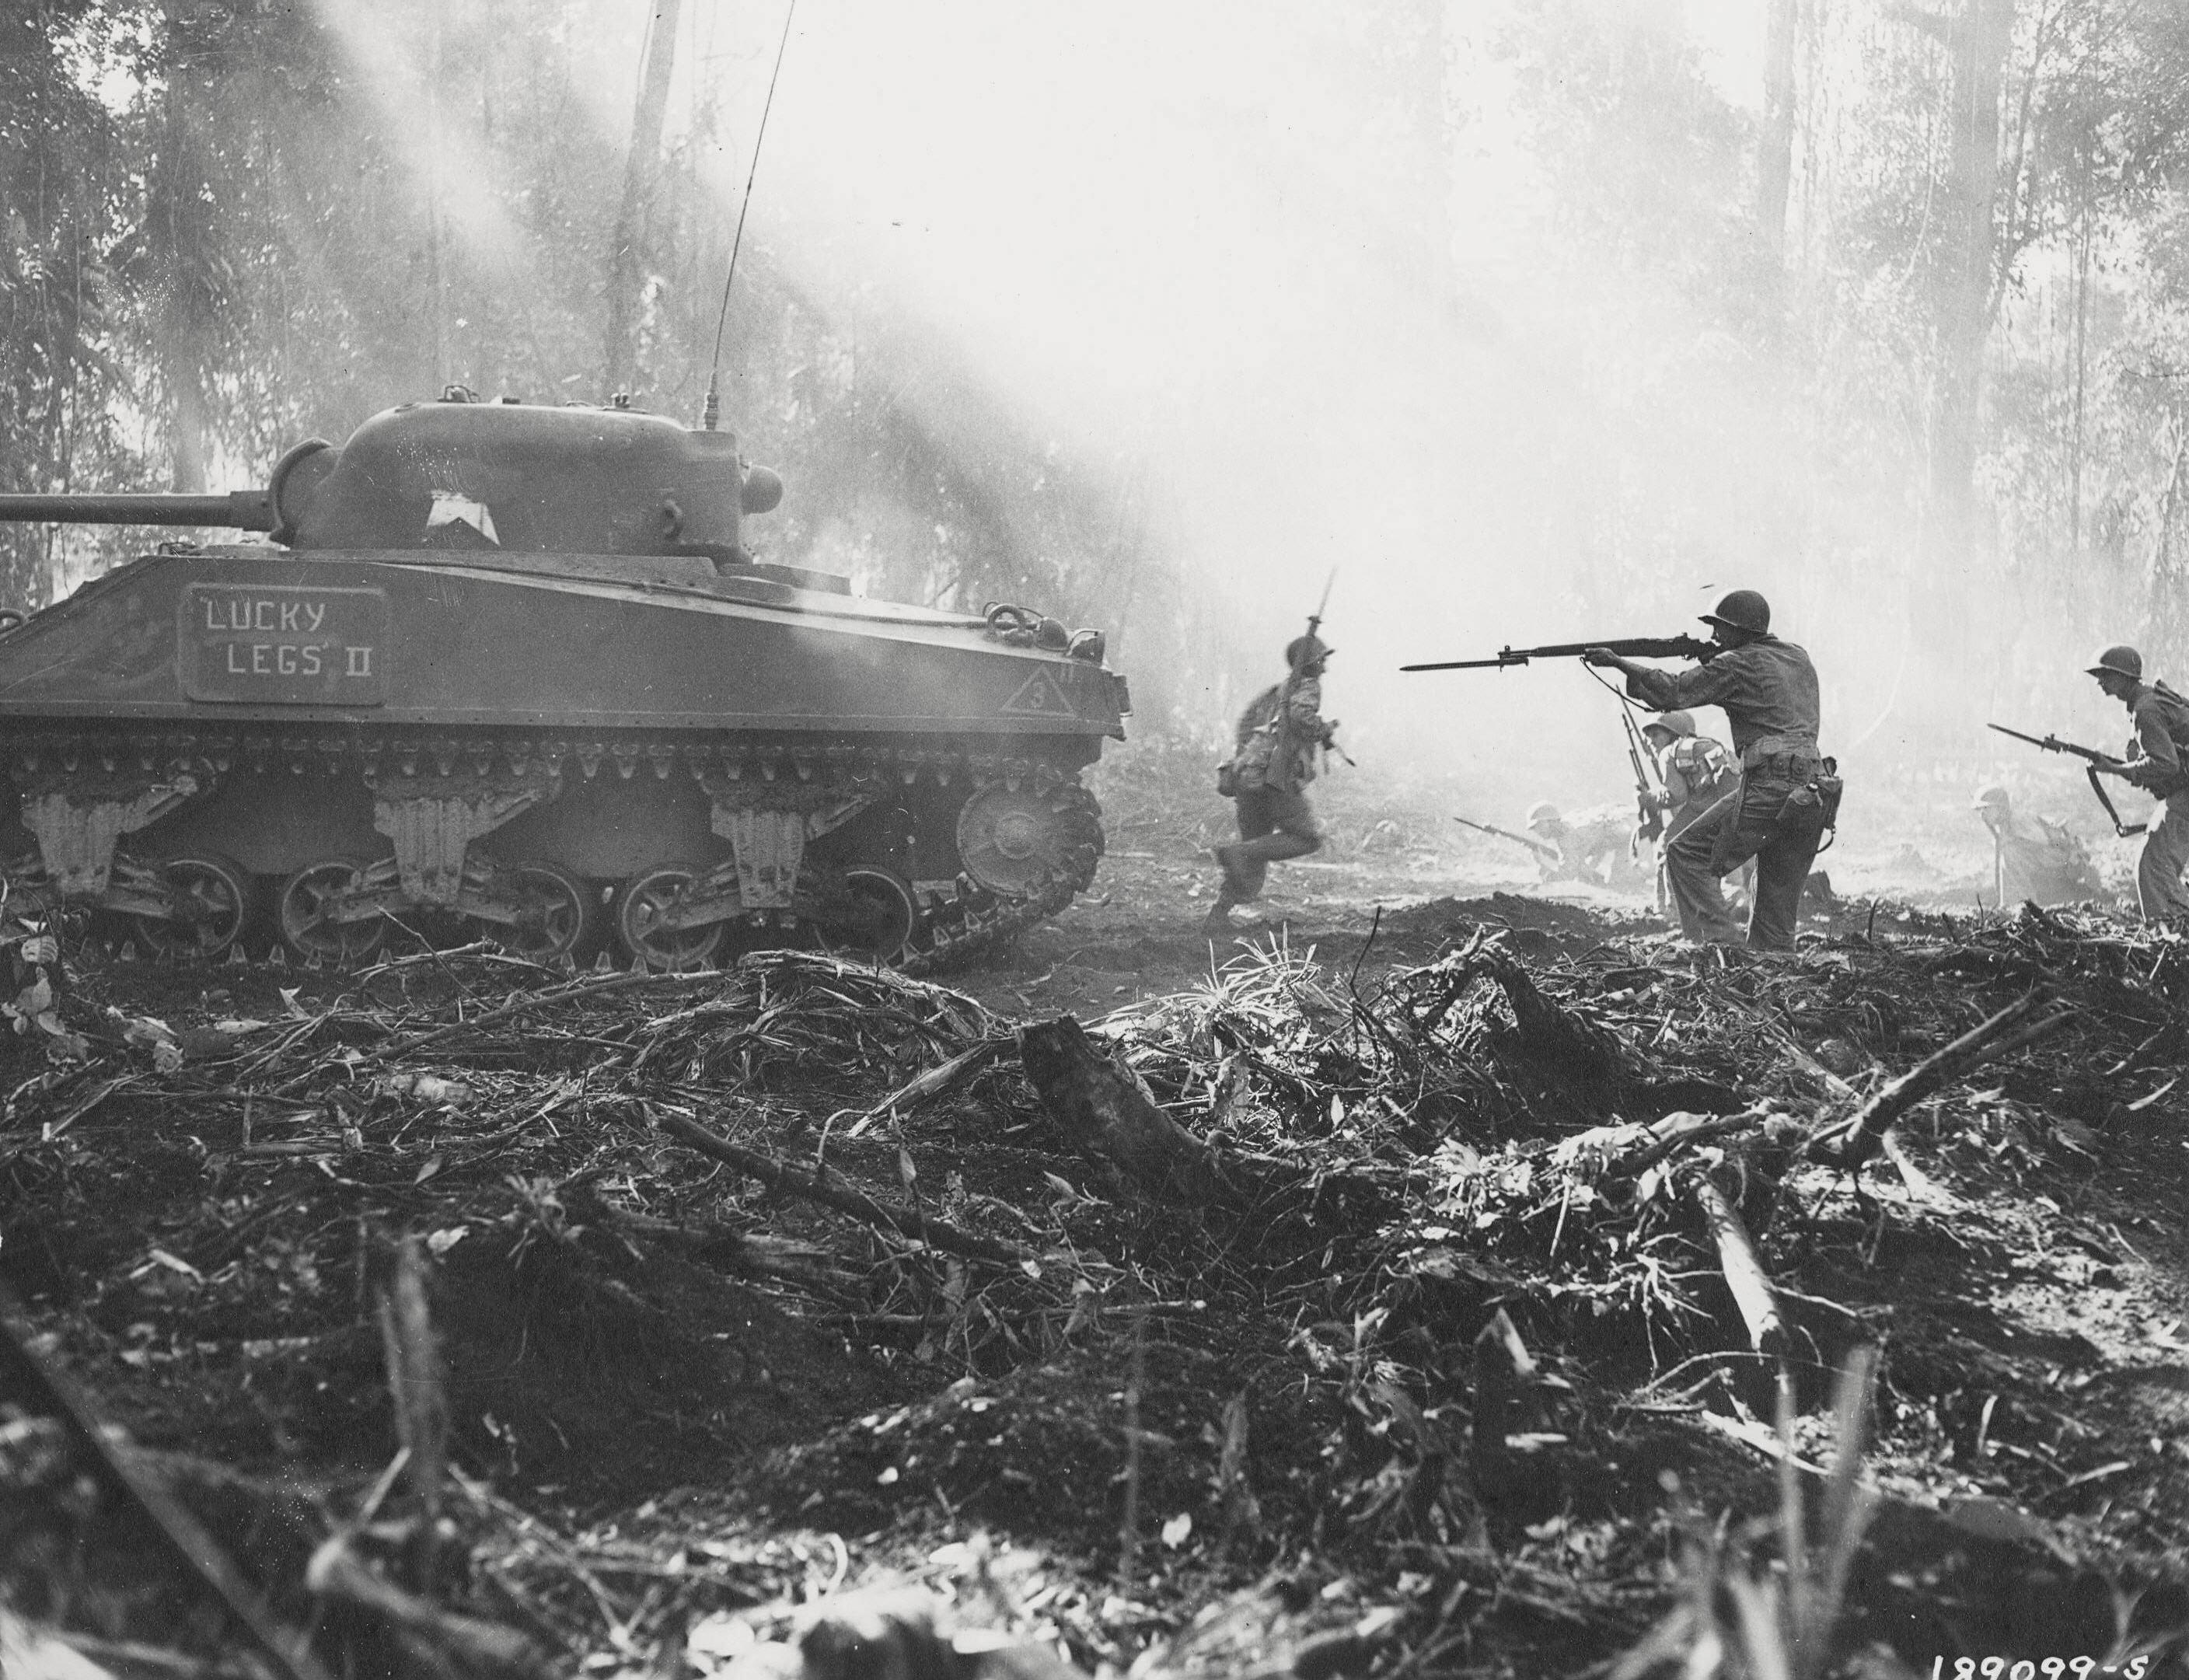 American troops advanced under the cover of M4 Sherman tank 'Lucky Legs II' during mop up operations on Bougainville, Solomon Islands, Mar 1944